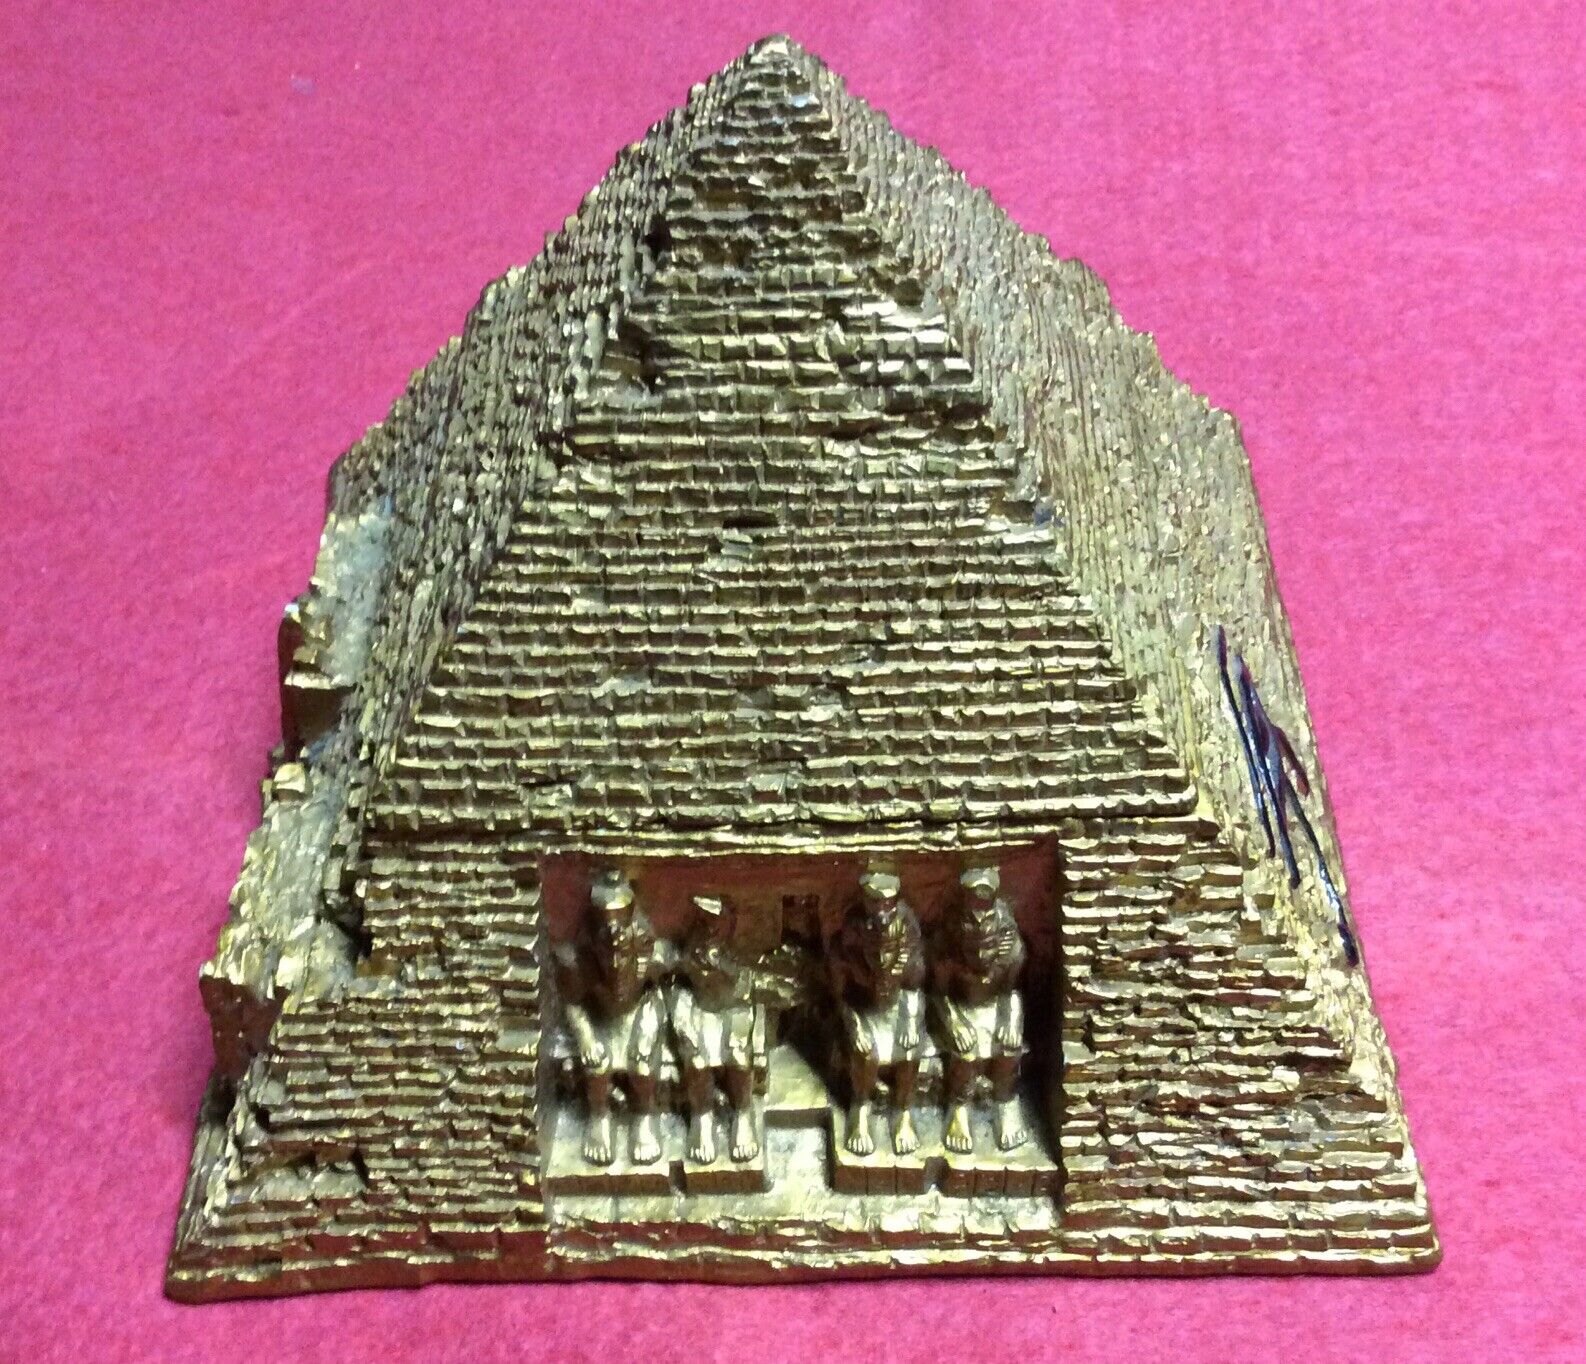 VTG PYRAMID JEWELRY/TRINKET BOX GoLd Color ,great Condition. 2000.